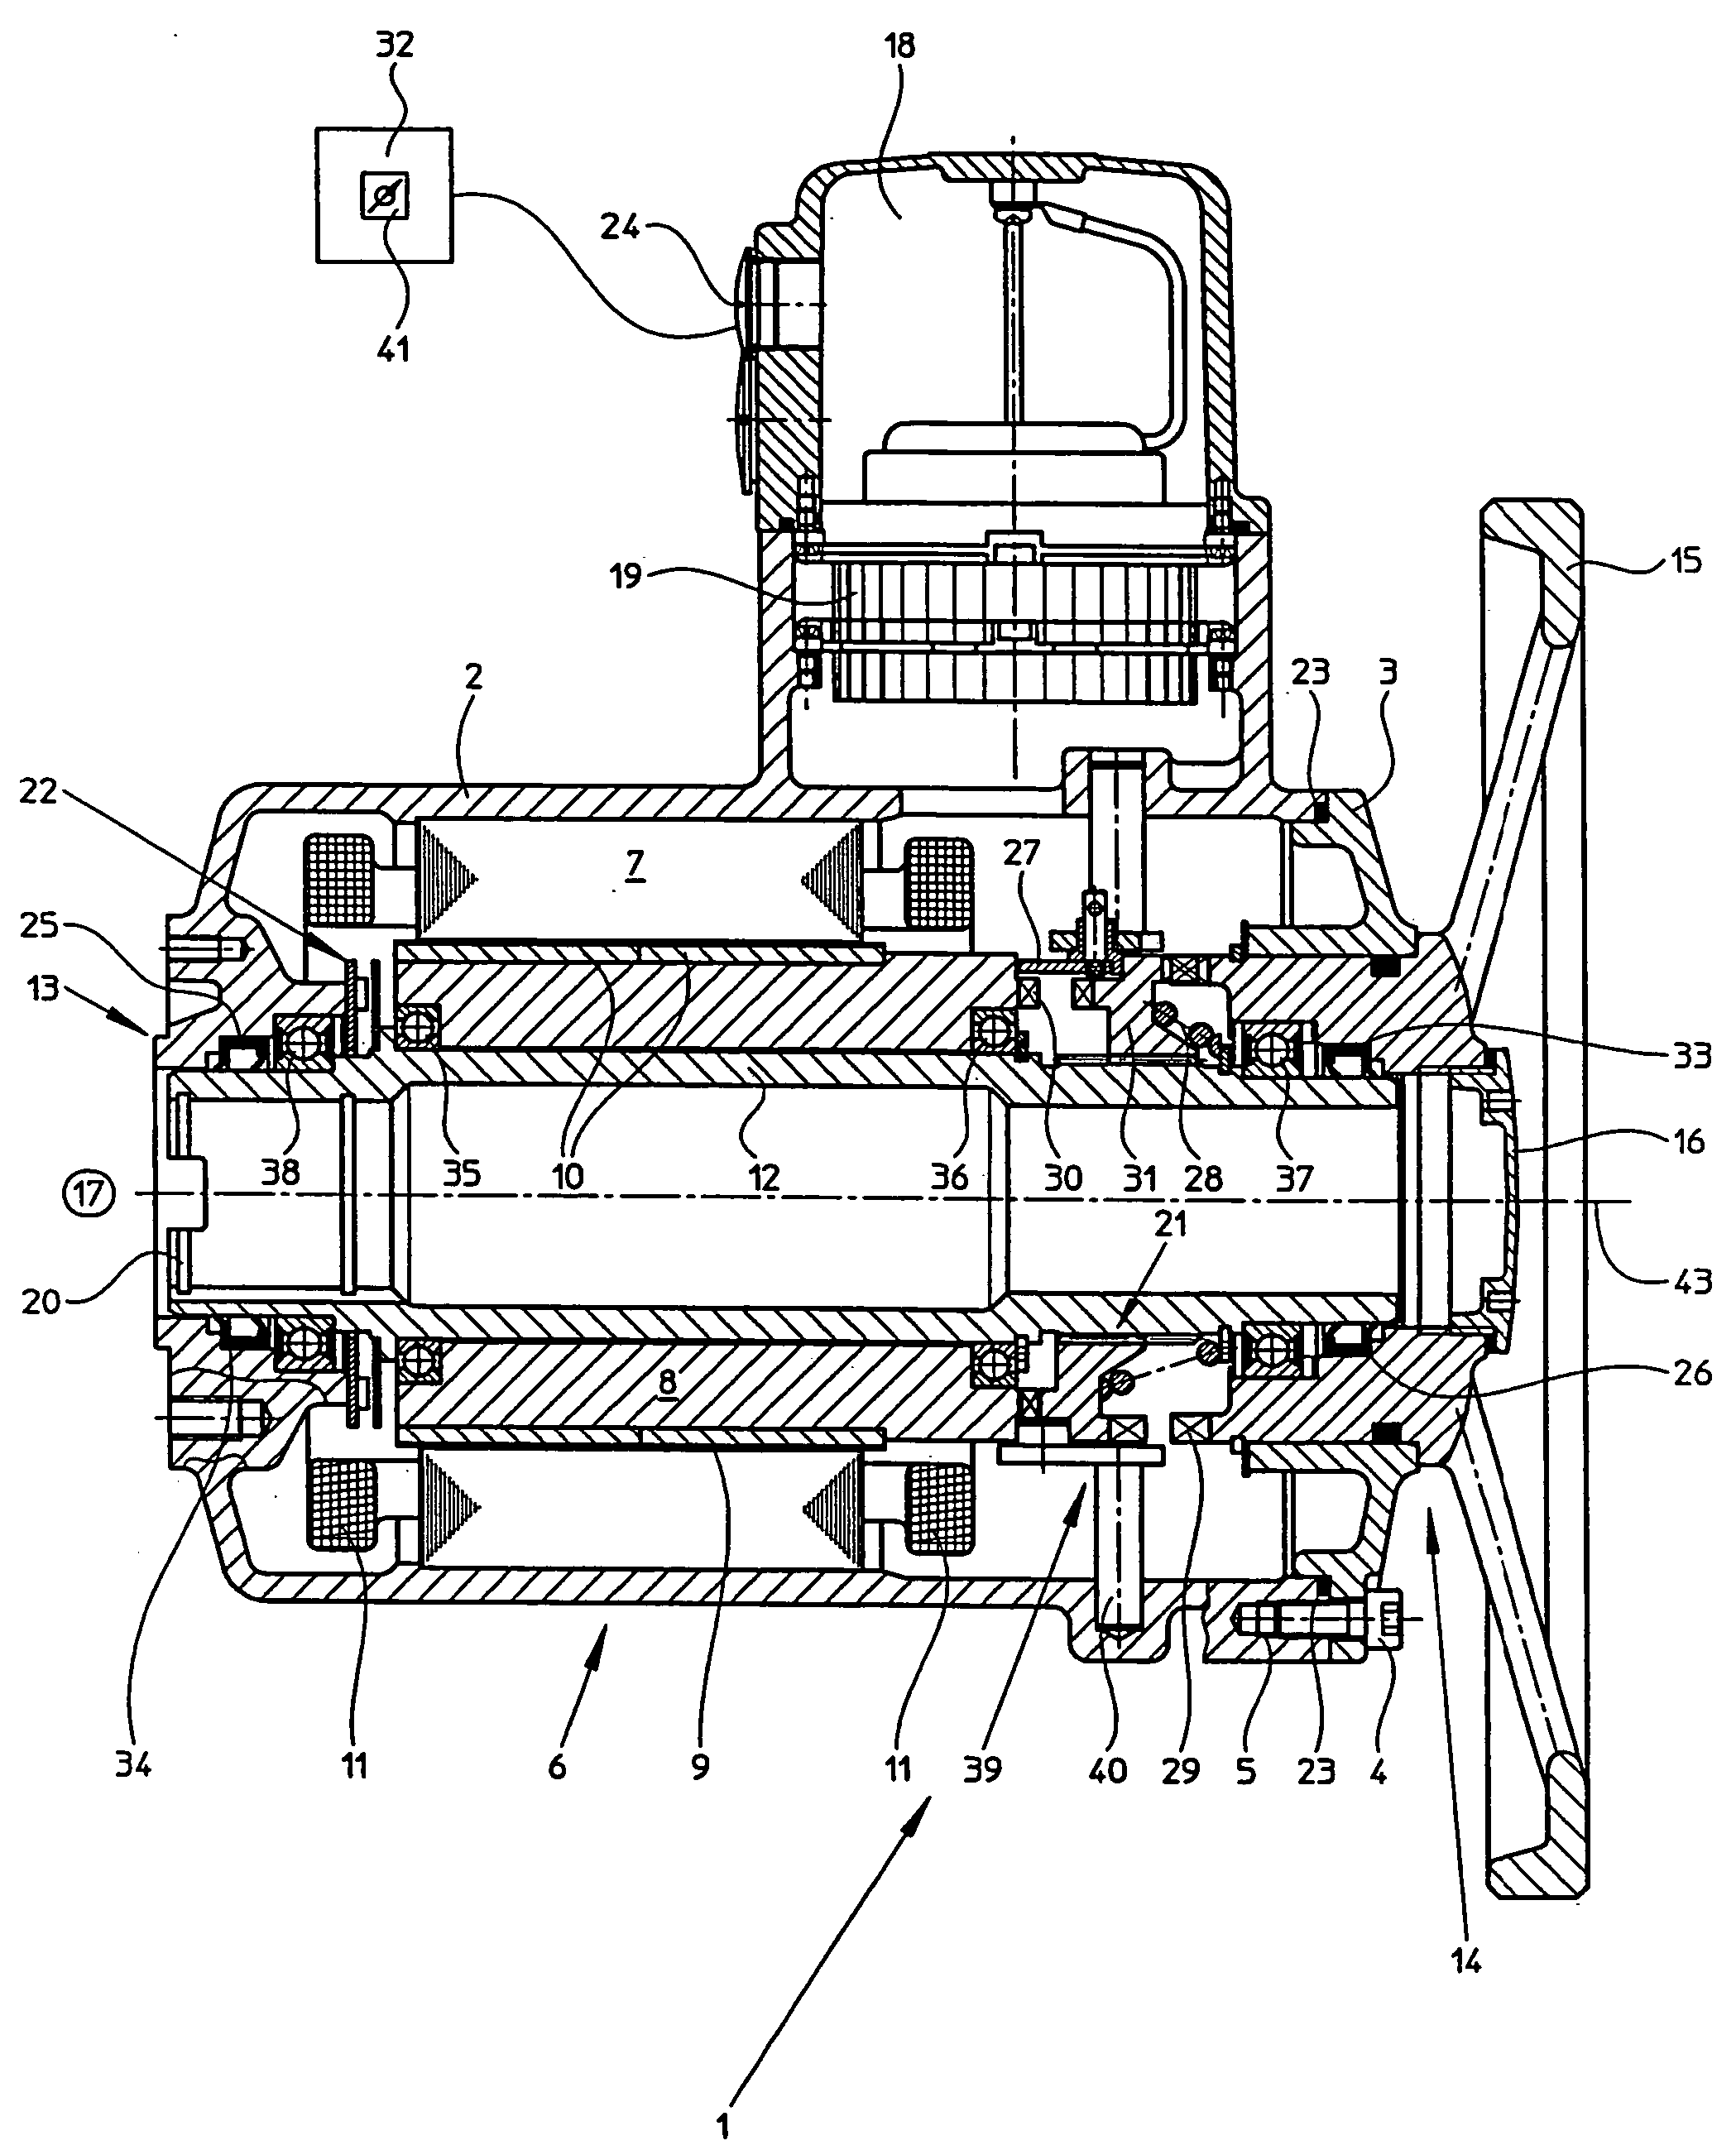 Actuator for operating a valve in process automation